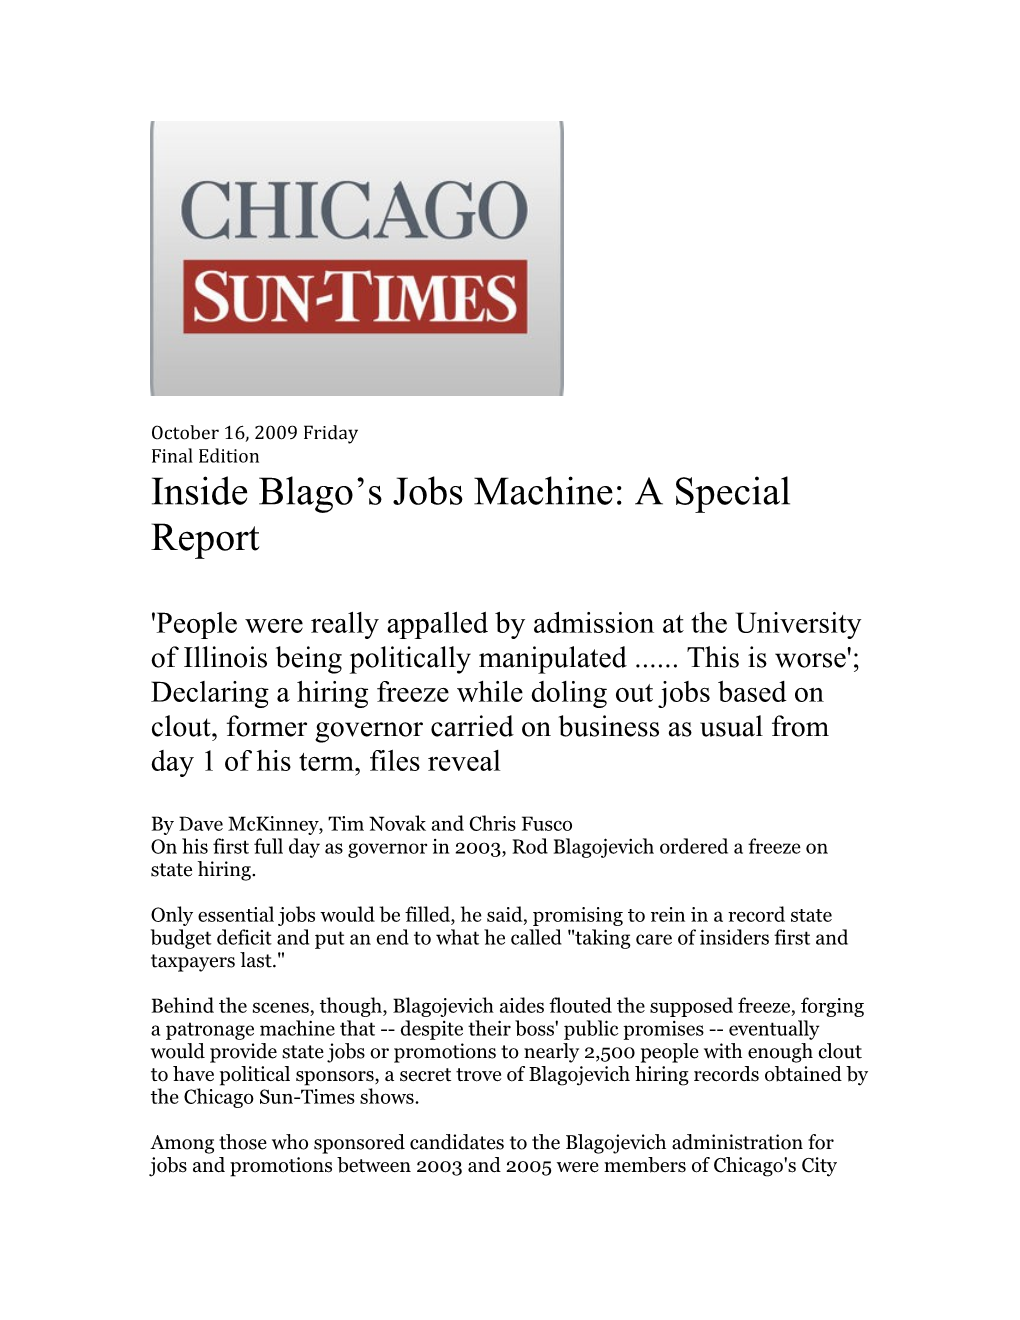 Inside Blago S Jobs Machine: a Special Report